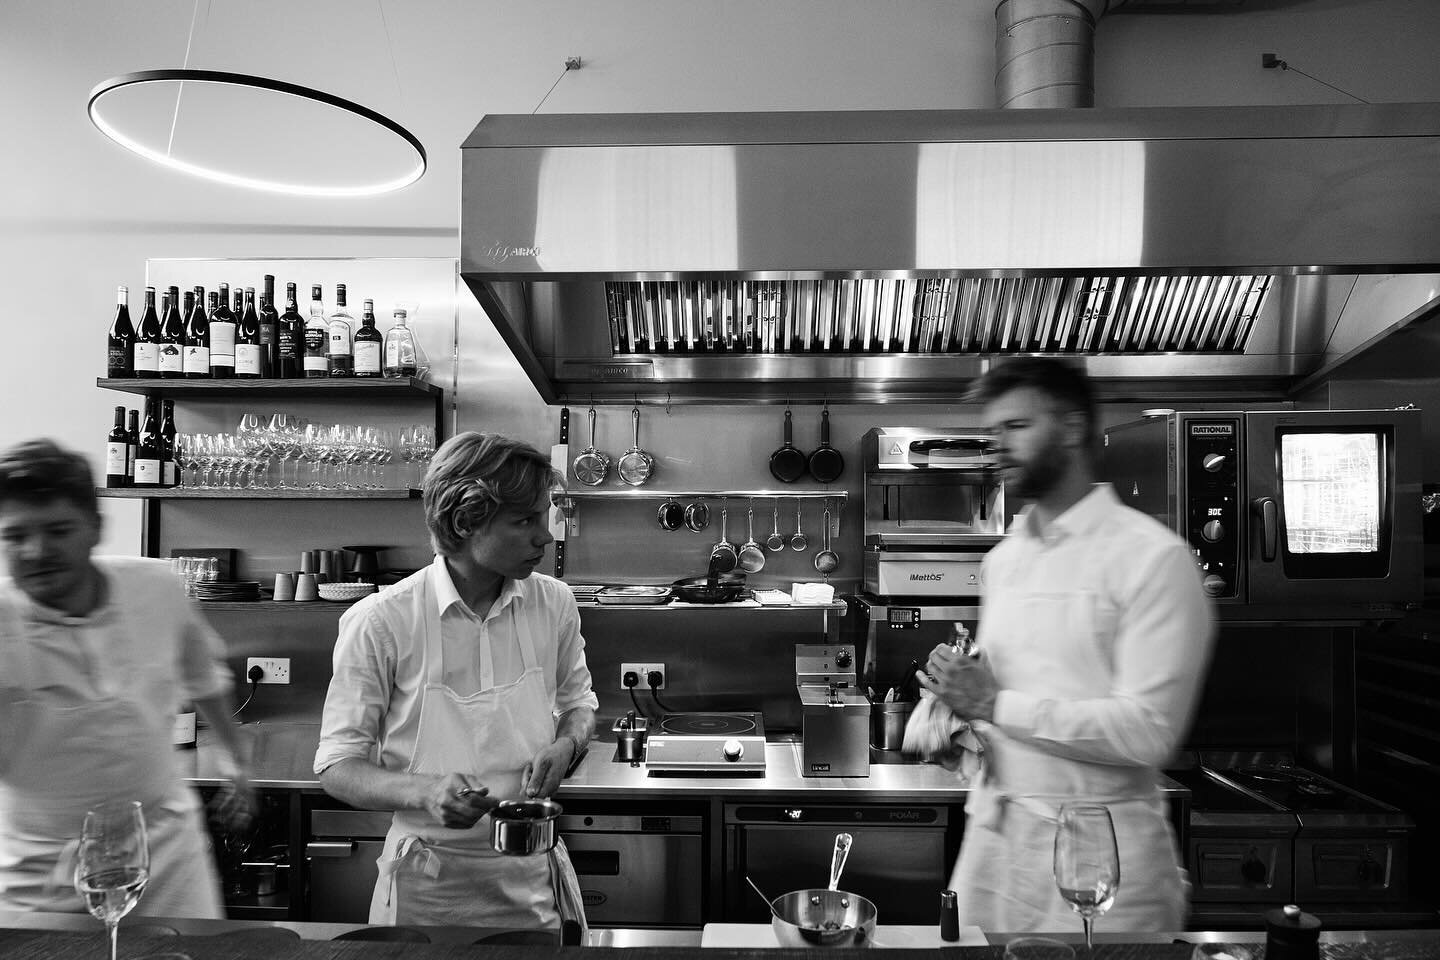 We are strengthening the team at Argile.
⠀⠀⠀⠀⠀⠀⠀⠀⠀
If you are excited by the above and wish to find out more, please get in touch via email at info@argilerestaurant.co.uk or enquire within.
⠀⠀⠀⠀⠀⠀⠀⠀⠀
📸: @stephenlister